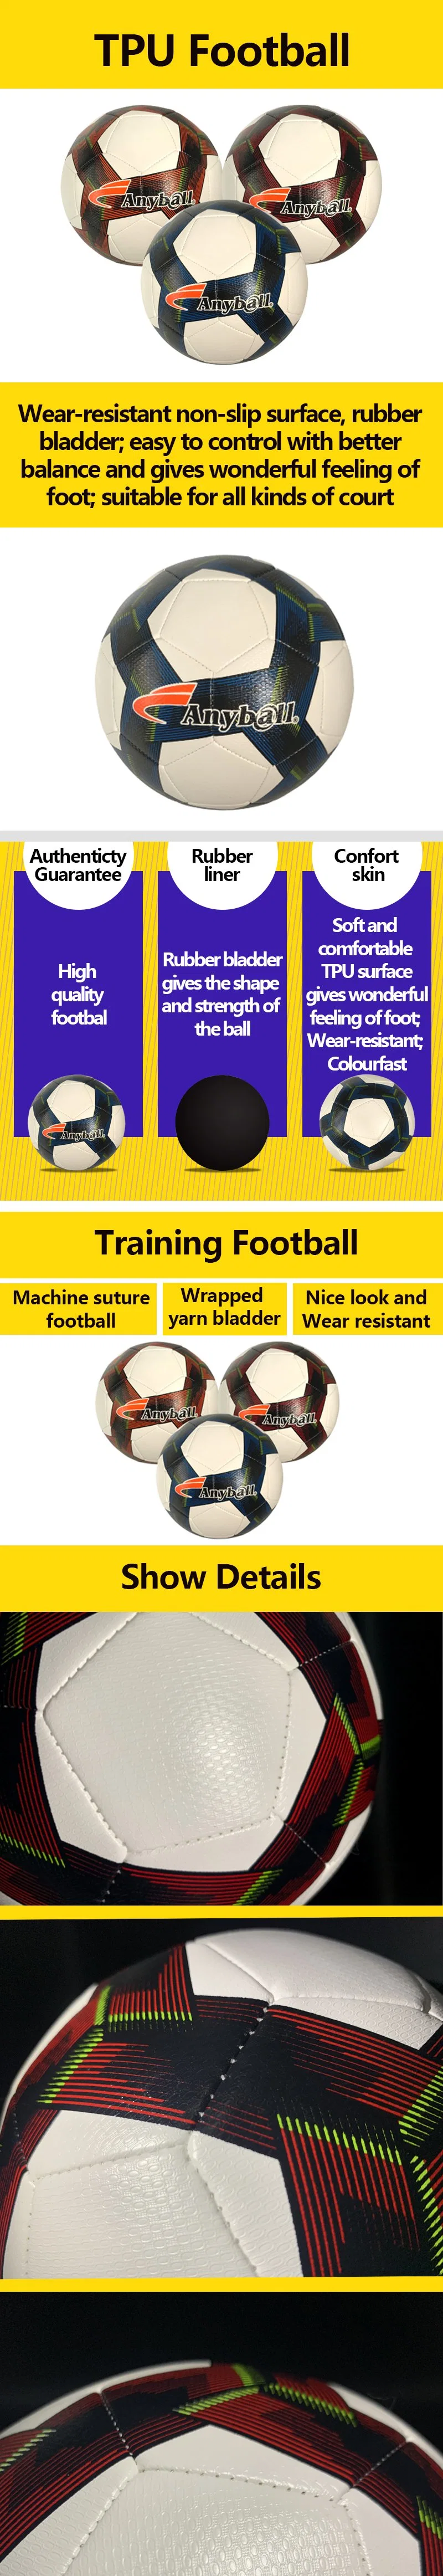 TPU Soccer Balls Professional Match Soccer Footballs for Training and Competition